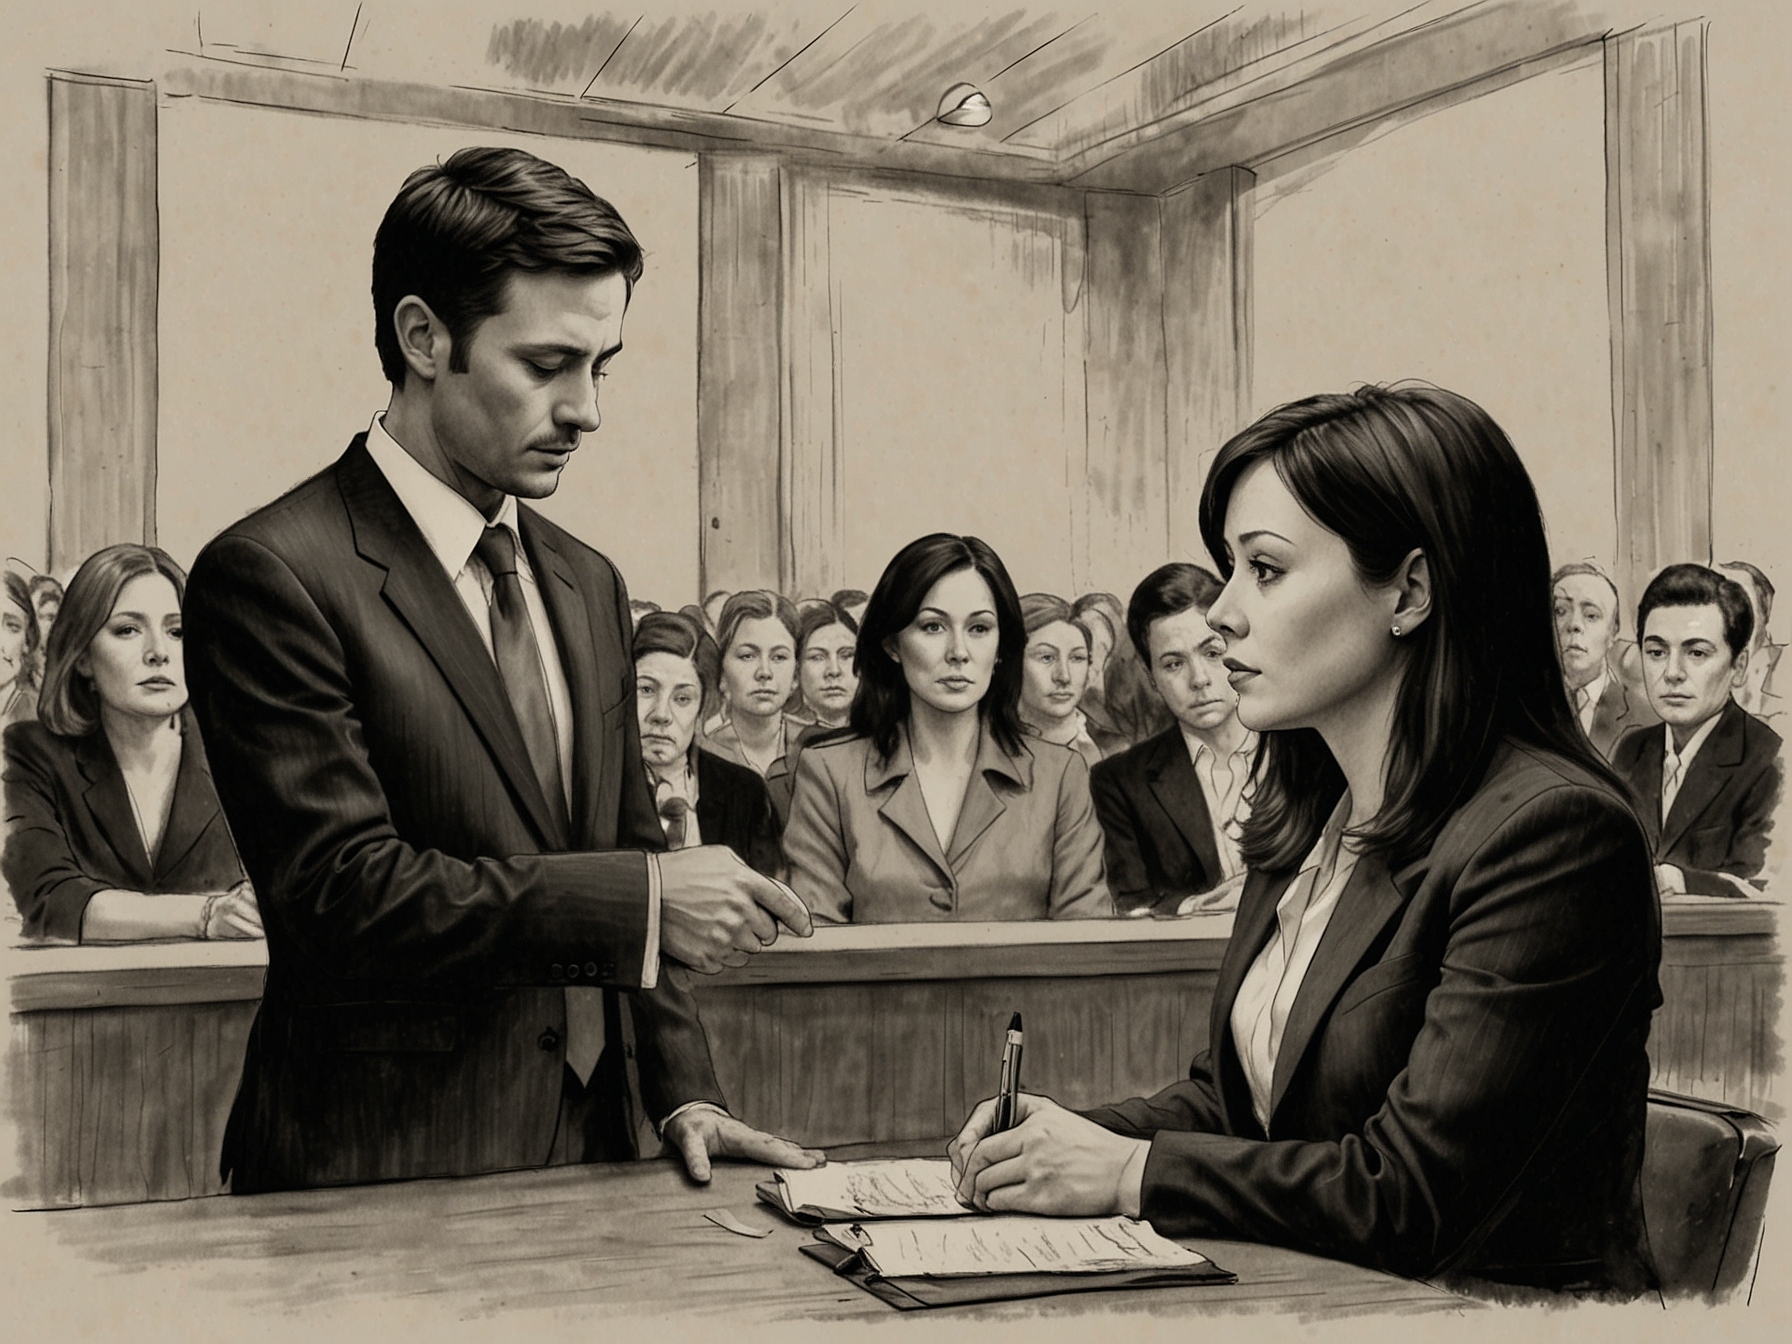 A somber courtroom sketch depicting Shannen Doherty and Kurt Iswarienko, capturing the tension and gravity of their contentious divorce and financial dispute amidst her health crisis.